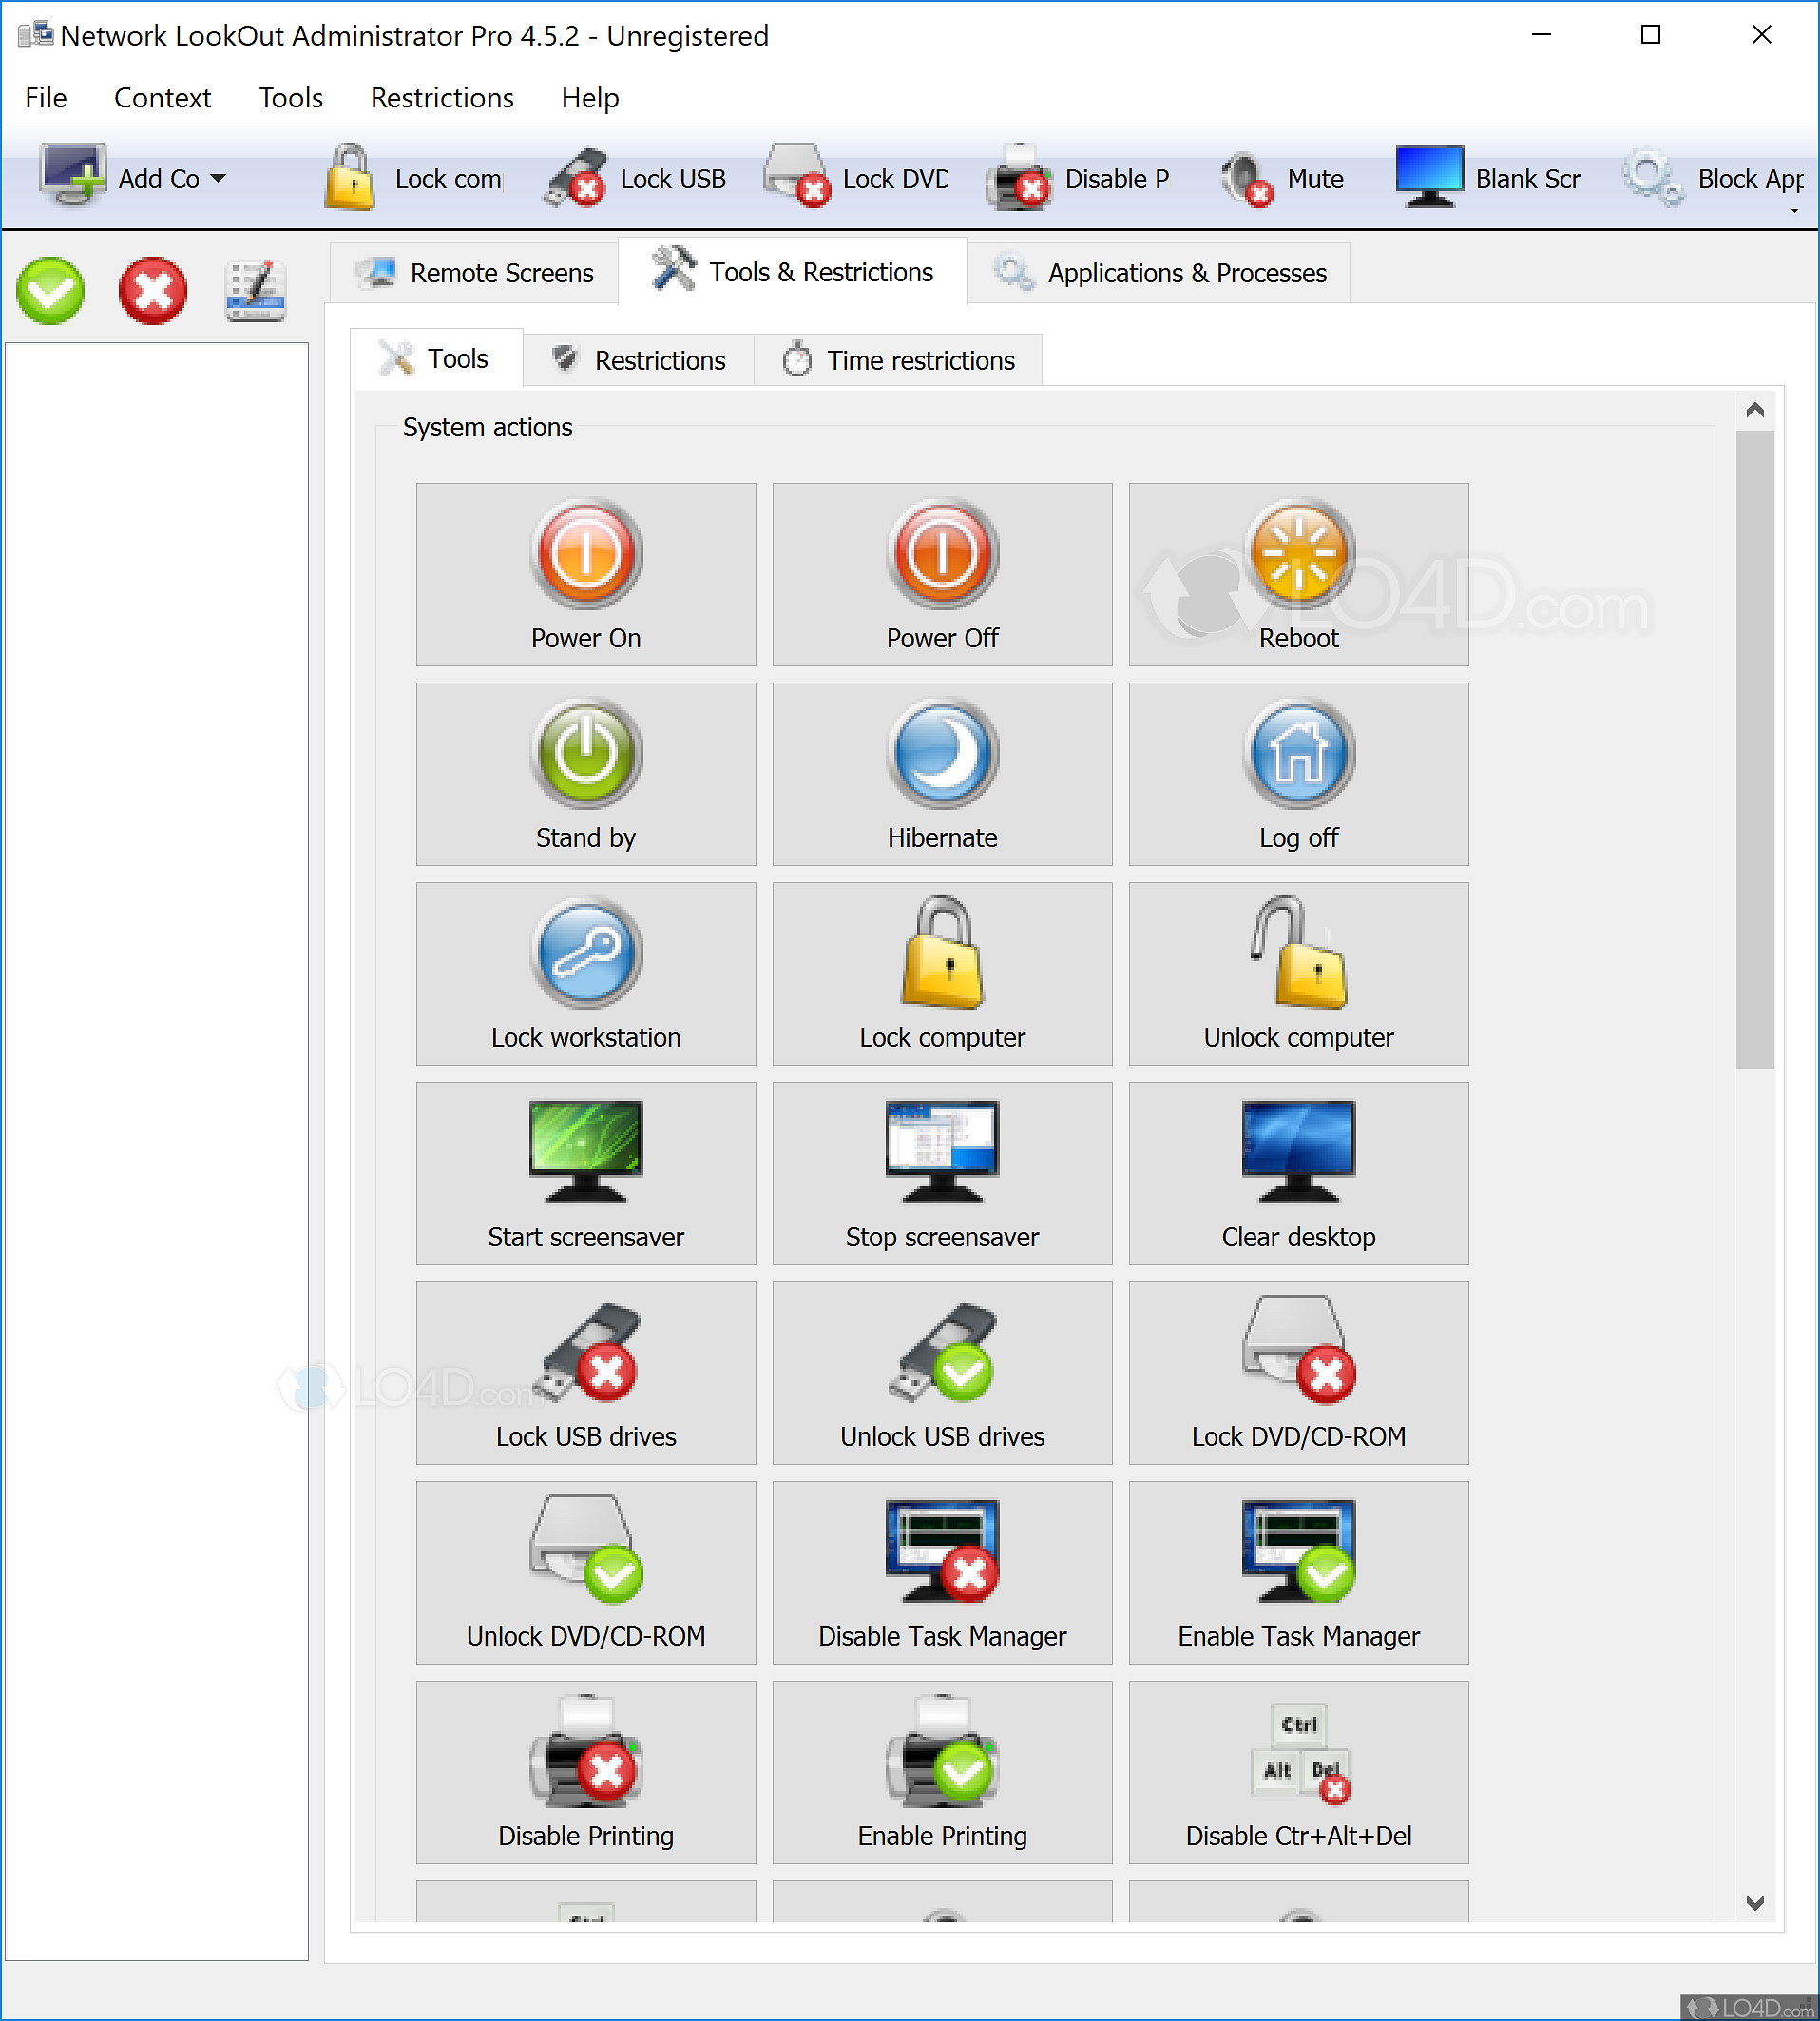 Network LookOut Administrator Professional 5.1.5 instal the new version for windows